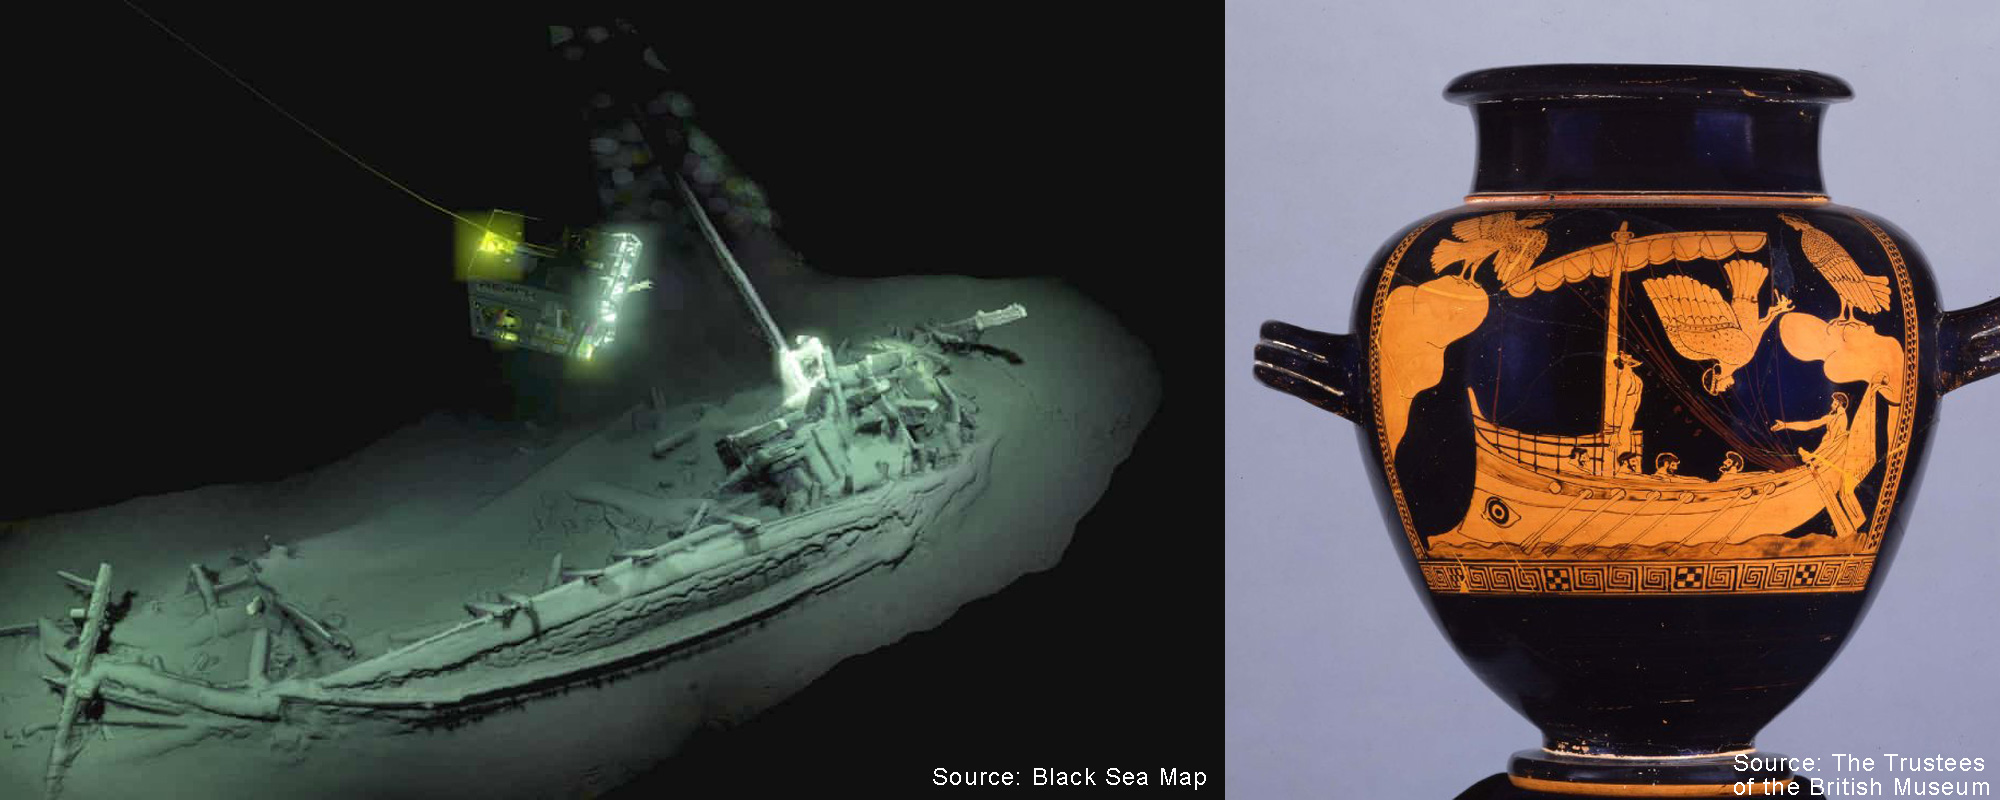 The world's oldest shipwreck identified in the Black Sea in 2018. The 2,400-yearold Greek merchant ship bears striking resemblance to the vessel depicted on the 5th century BC Siren Vase